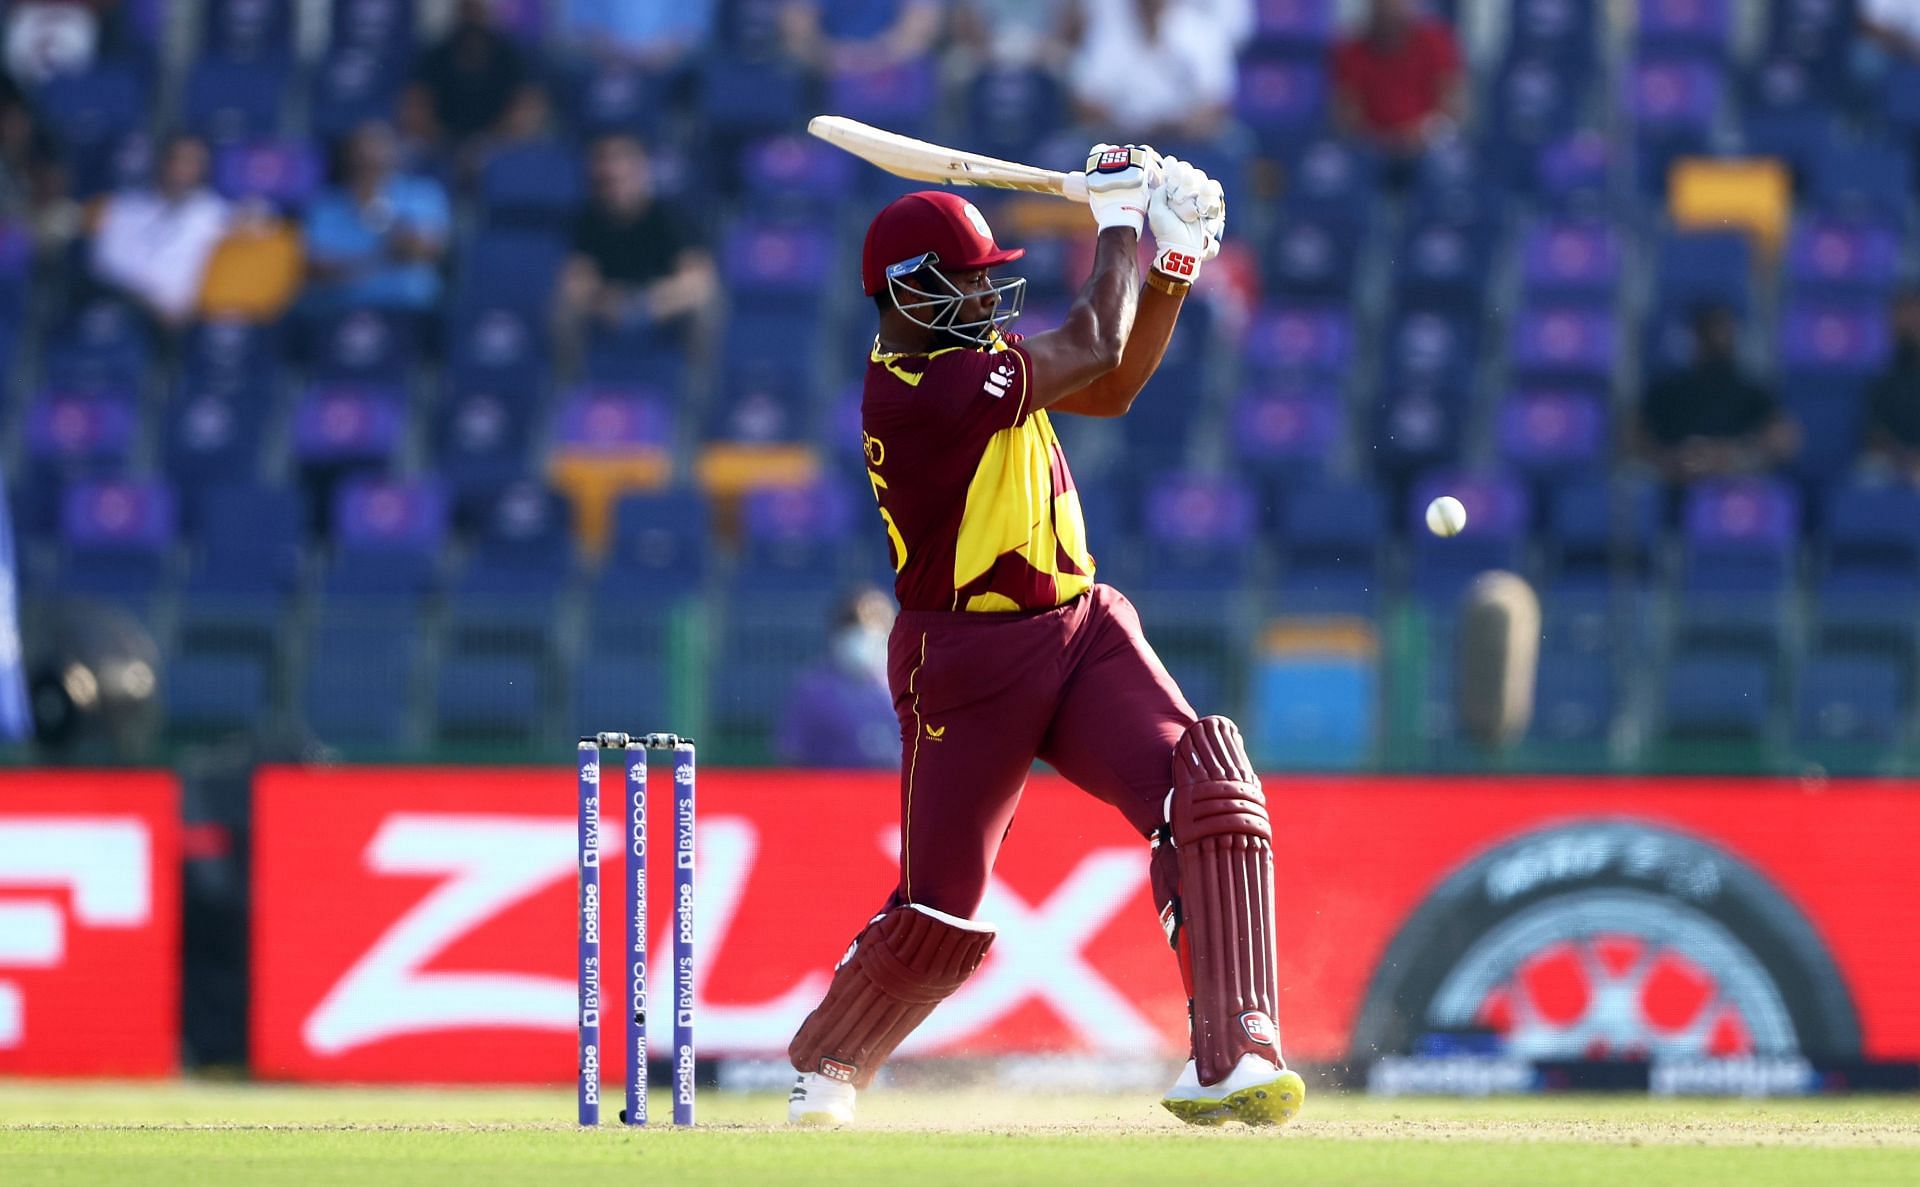 Kieron Pollard hit six sixes in an over against Sri Lanka. Pic: Getty Images